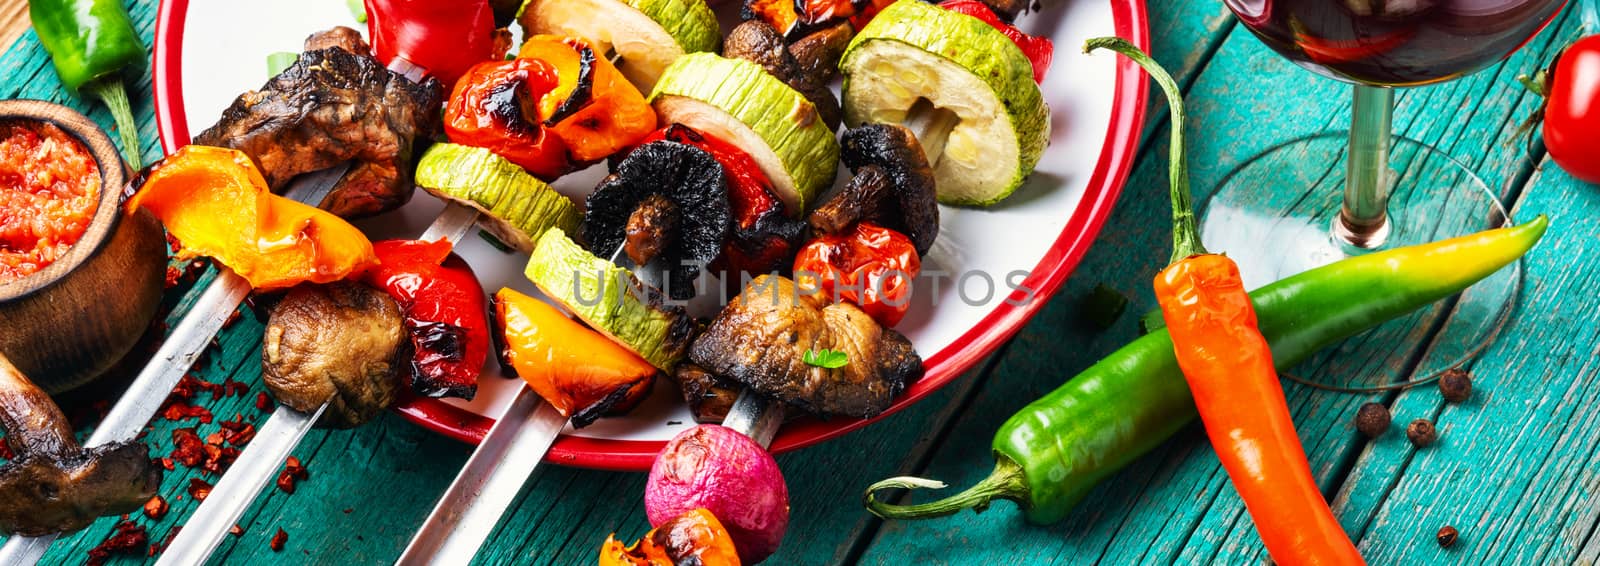 Grilled vegetable shish kebab with peppers and mushrooms.Long banner